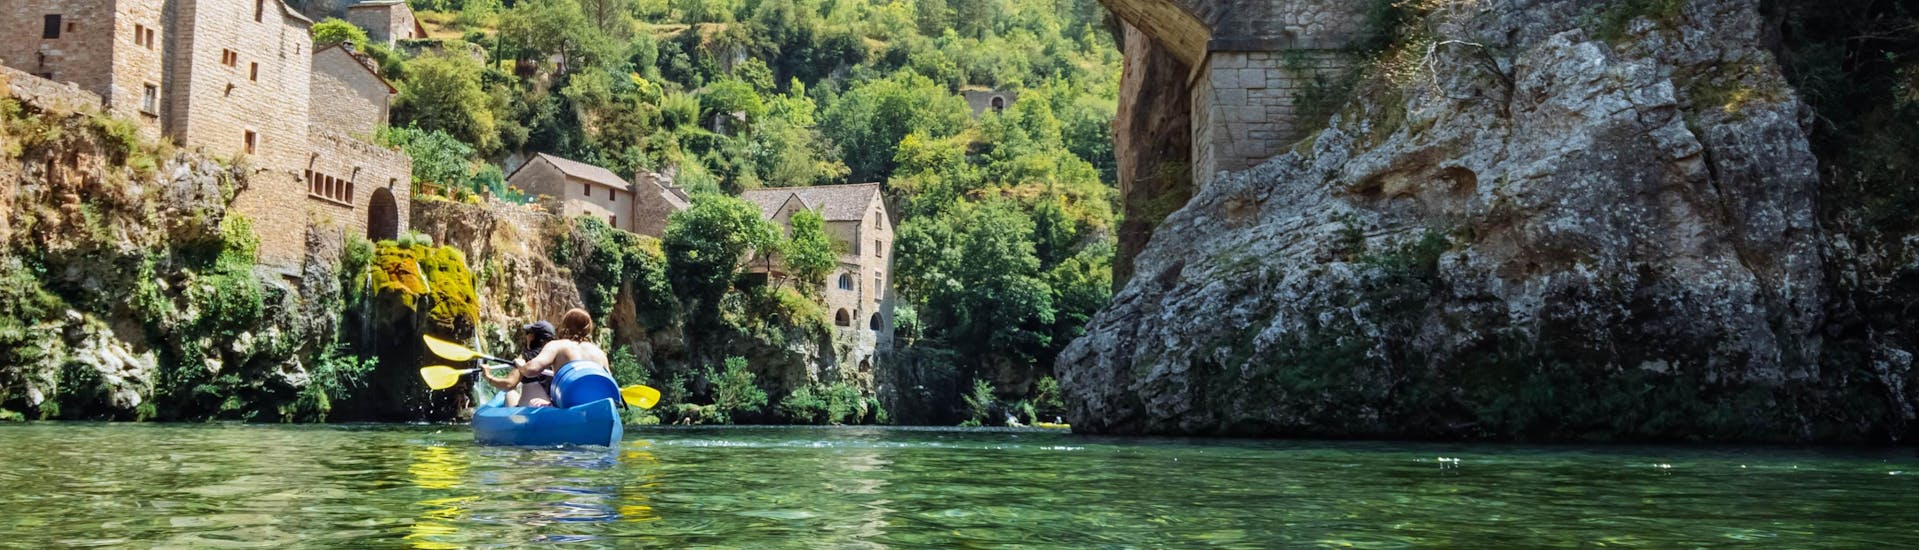 Two people are paddling down the Tarn River while crossing a bridge in the famous medieval town of Sainte-Énimie in the Tarn Gorges, one of France's popular canoeing locations.